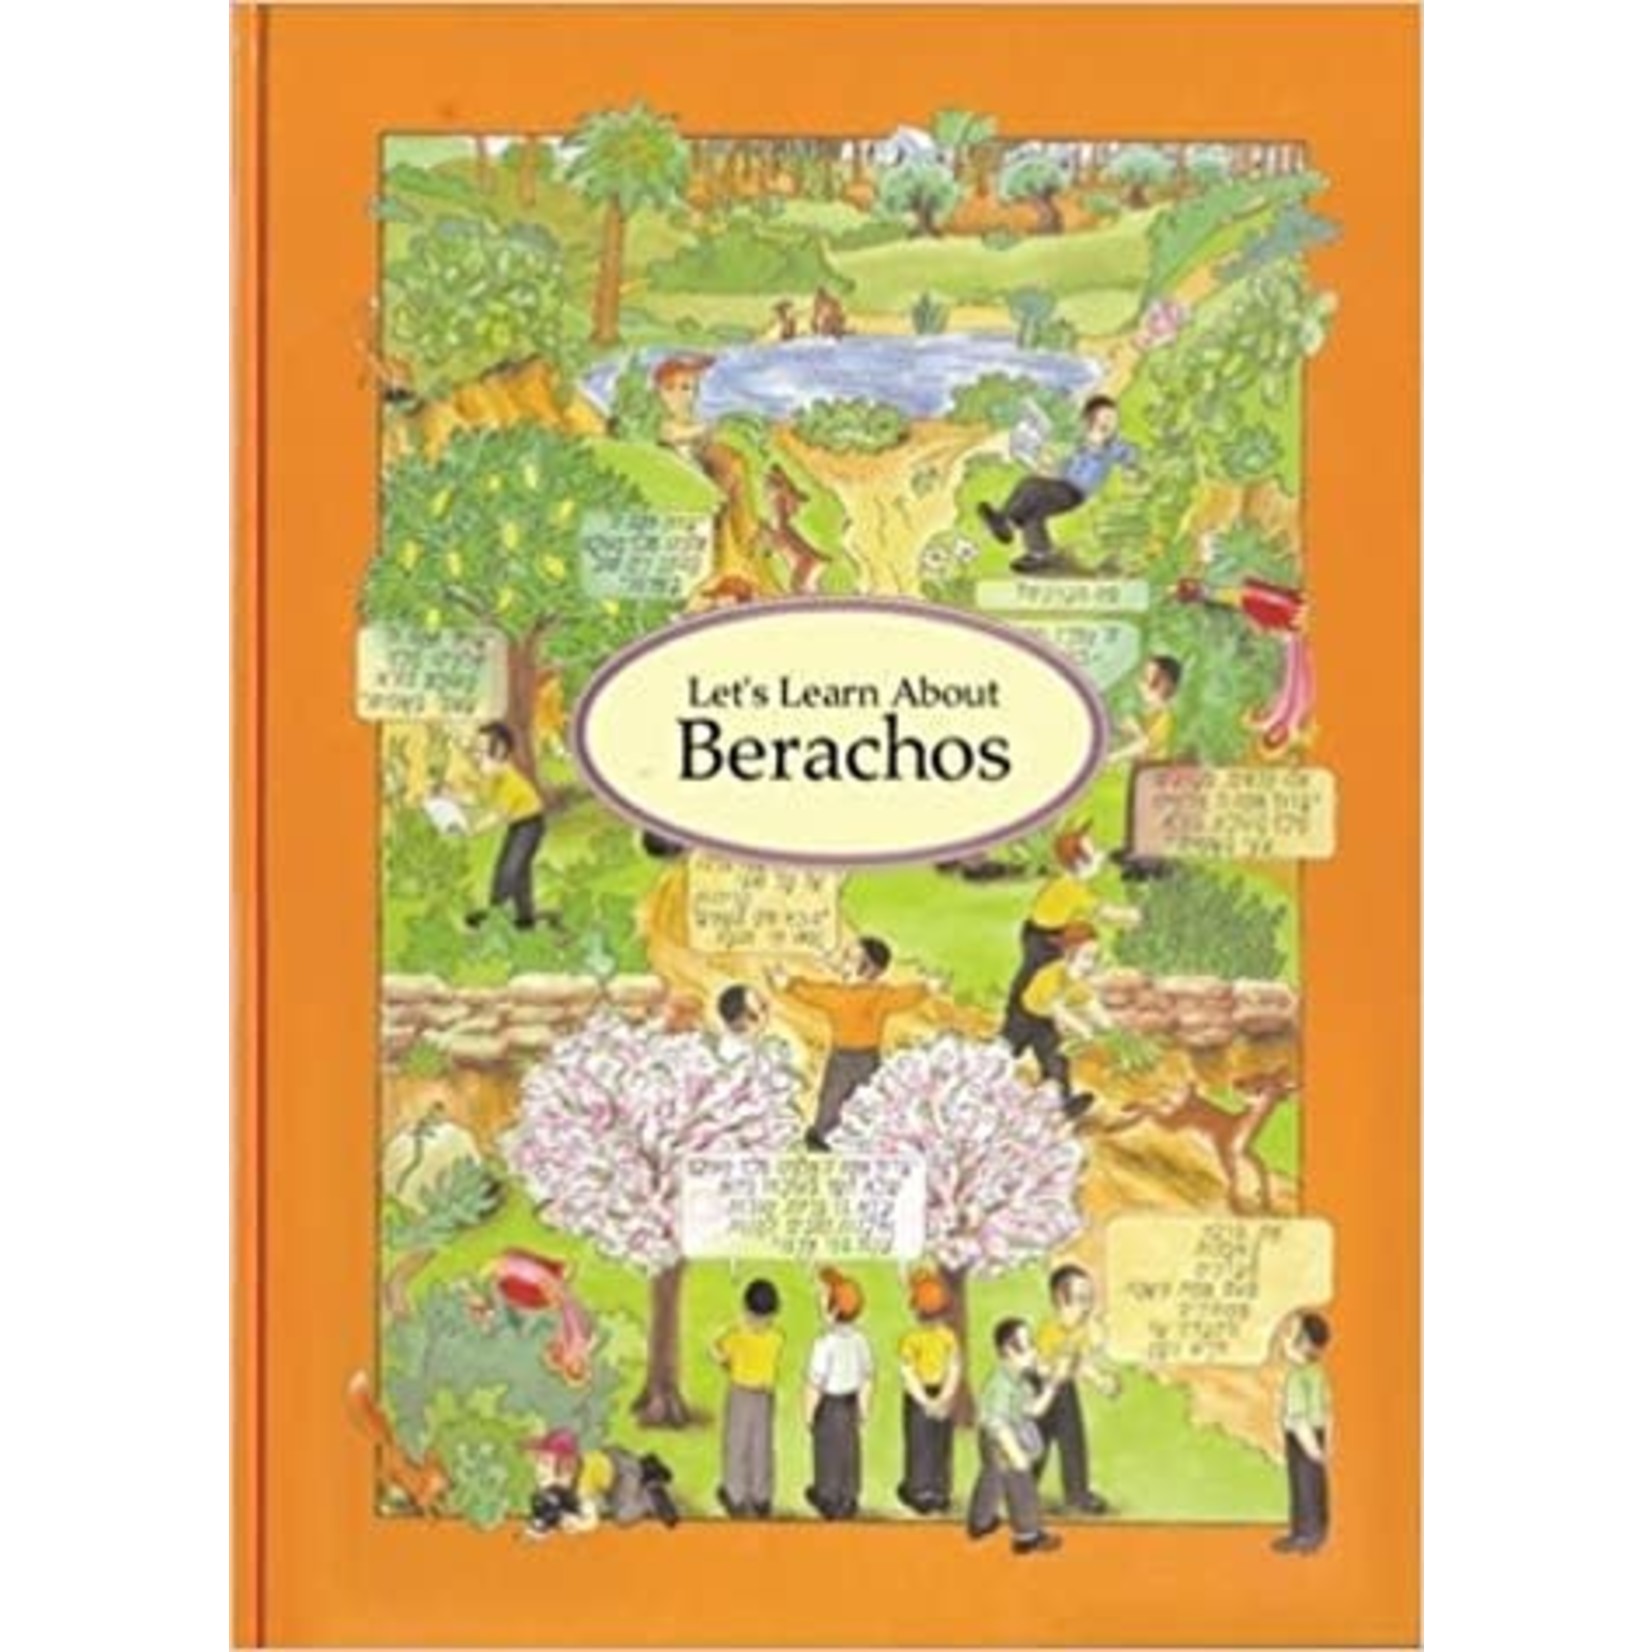 Let's Learn about Berachos